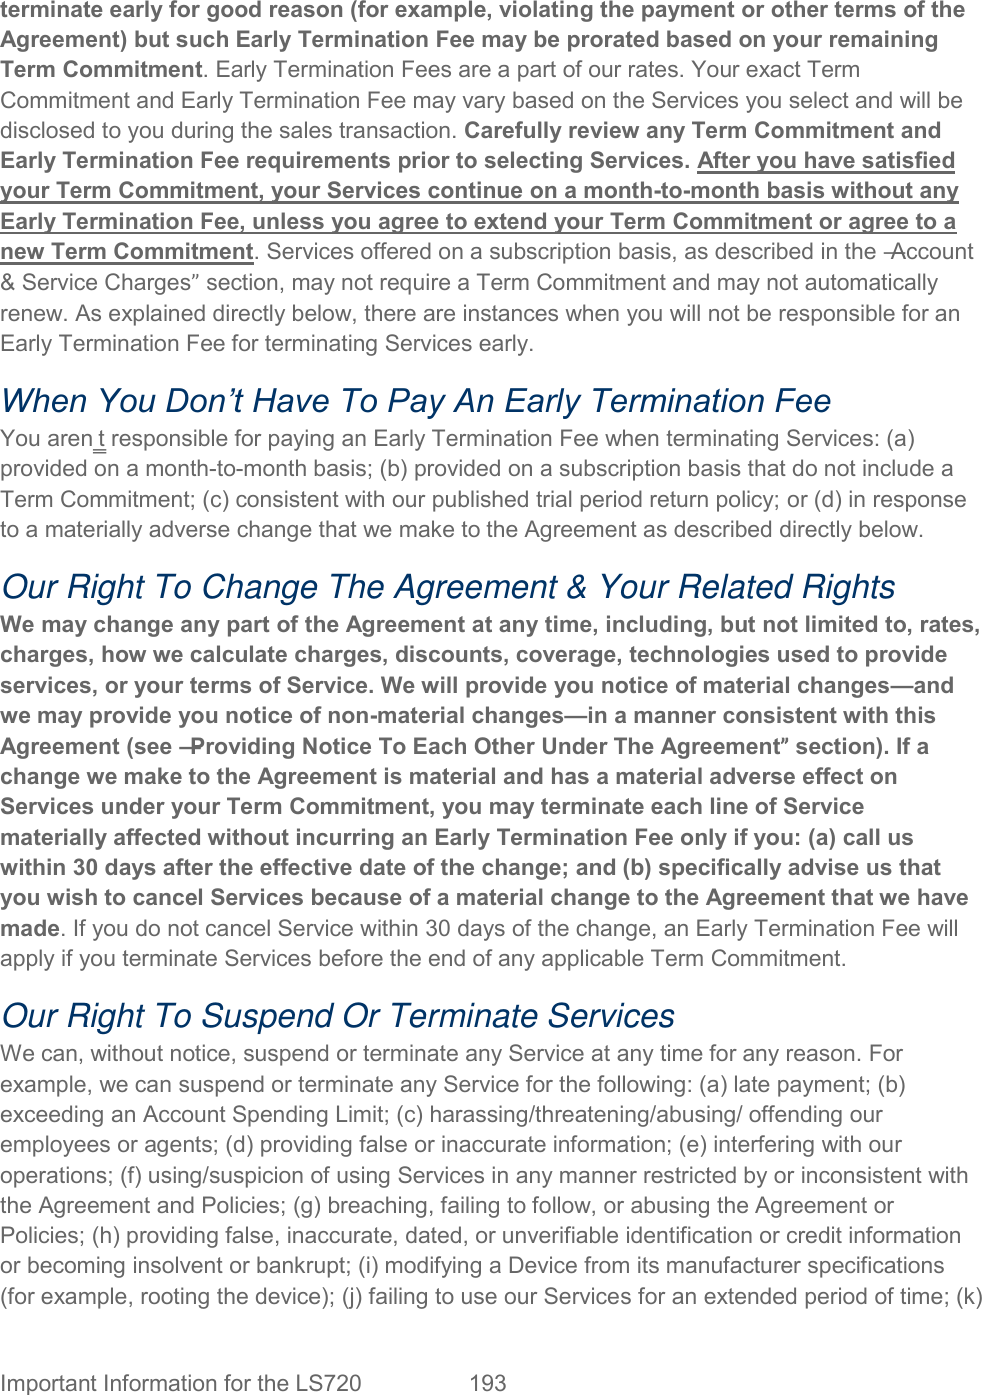  Important Information for the LS720  193   terminate early for good reason (for example, violating the payment or other terms of the Agreement) but such Early Termination Fee may be prorated based on your remaining Term Commitment. Early Termination Fees are a part of our rates. Your exact Term Commitment and Early Termination Fee may vary based on the Services you select and will be disclosed to you during the sales transaction. Carefully review any Term Commitment and Early Termination Fee requirements prior to selecting Services. After you have satisfied your Term Commitment, your Services continue on a month-to-month basis without any Early Termination Fee, unless you agree to extend your Term Commitment or agree to a new Term Commitment. Services offered on a subscription basis, as described in the ―Account &amp; Service Charges” section, may not require a Term Commitment and may not automatically renew. As explained directly below, there are instances when you will not be responsible for an Early Termination Fee for terminating Services early. When You Don’t Have To Pay An Early Termination Fee You aren‗t responsible for paying an Early Termination Fee when terminating Services: (a) provided on a month-to-month basis; (b) provided on a subscription basis that do not include a Term Commitment; (c) consistent with our published trial period return policy; or (d) in response to a materially adverse change that we make to the Agreement as described directly below. Our Right To Change The Agreement &amp; Your Related Rights We may change any part of the Agreement at any time, including, but not limited to, rates, charges, how we calculate charges, discounts, coverage, technologies used to provide services, or your terms of Service. We will provide you notice of material changes—and we may provide you notice of non-material changes—in a manner consistent with this Agreement (see ―Providing Notice To Each Other Under The Agreement” section). If a change we make to the Agreement is material and has a material adverse effect on Services under your Term Commitment, you may terminate each line of Service materially affected without incurring an Early Termination Fee only if you: (a) call us within 30 days after the effective date of the change; and (b) specifically advise us that you wish to cancel Services because of a material change to the Agreement that we have made. If you do not cancel Service within 30 days of the change, an Early Termination Fee will apply if you terminate Services before the end of any applicable Term Commitment. Our Right To Suspend Or Terminate Services We can, without notice, suspend or terminate any Service at any time for any reason. For example, we can suspend or terminate any Service for the following: (a) late payment; (b) exceeding an Account Spending Limit; (c) harassing/threatening/abusing/ offending our employees or agents; (d) providing false or inaccurate information; (e) interfering with our operations; (f) using/suspicion of using Services in any manner restricted by or inconsistent with the Agreement and Policies; (g) breaching, failing to follow, or abusing the Agreement or Policies; (h) providing false, inaccurate, dated, or unverifiable identification or credit information or becoming insolvent or bankrupt; (i) modifying a Device from its manufacturer specifications (for example, rooting the device); (j) failing to use our Services for an extended period of time; (k) 